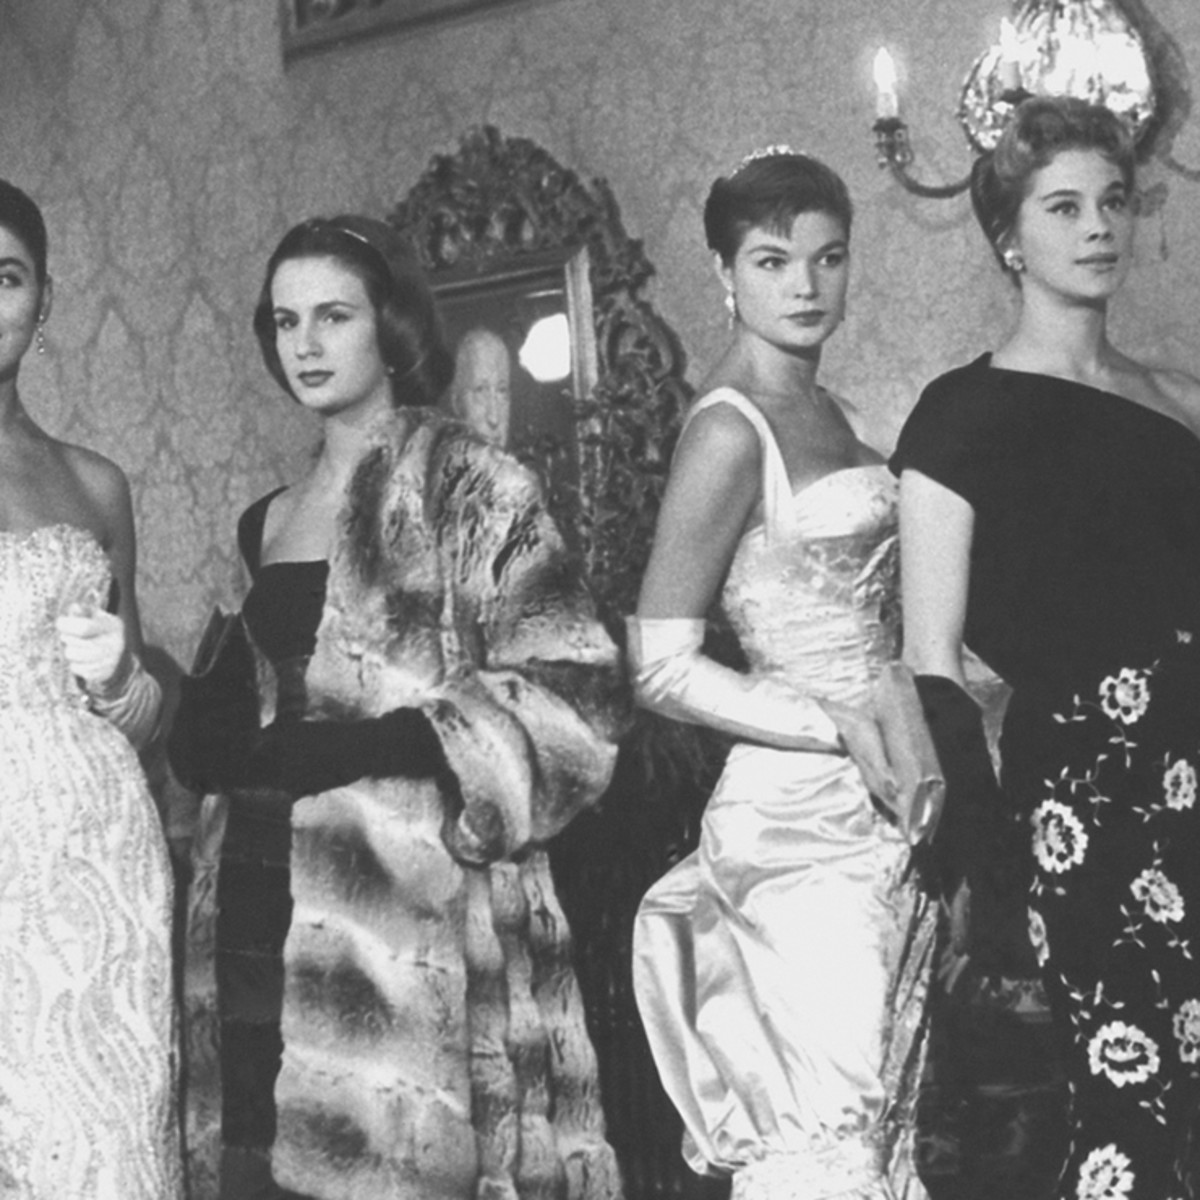 Mar. 03, 1966 - Italian Knitwear Fashion Shows in London: An Italian  Knitwear Fashion Show, presented by the Italian Institute Foreign Trade, is  being held this afternoon at the Carlton Tower Ballroom